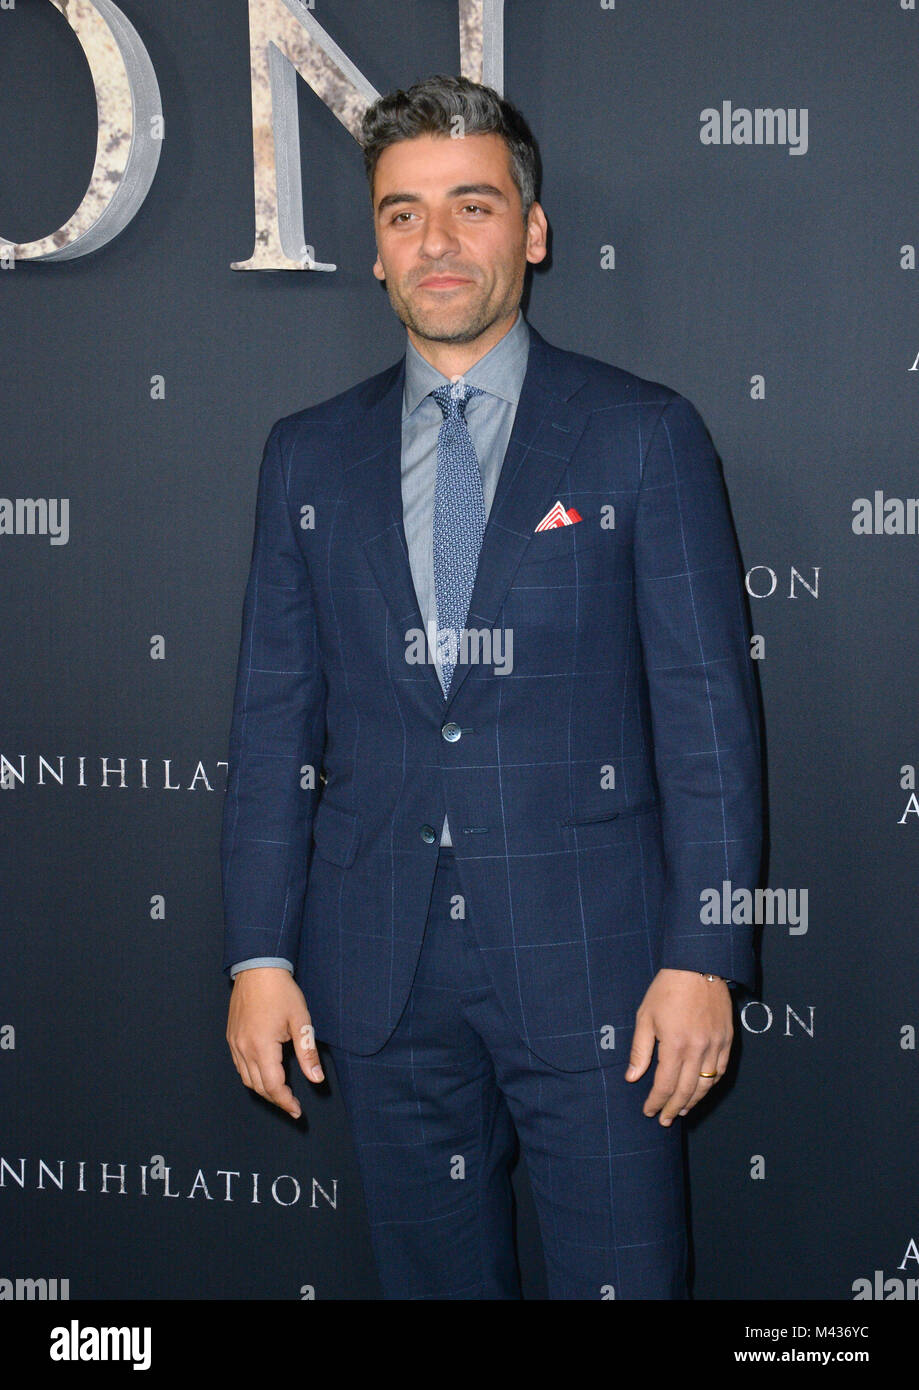 Los Angeles, California, USA. 13th February, 2018. Oscar Isaac at the premiere for 'Annihilation' at the Regency Village Theatre Picture: Sarah Stewart Credit: Sarah Stewart/Alamy Live News Stock Photo